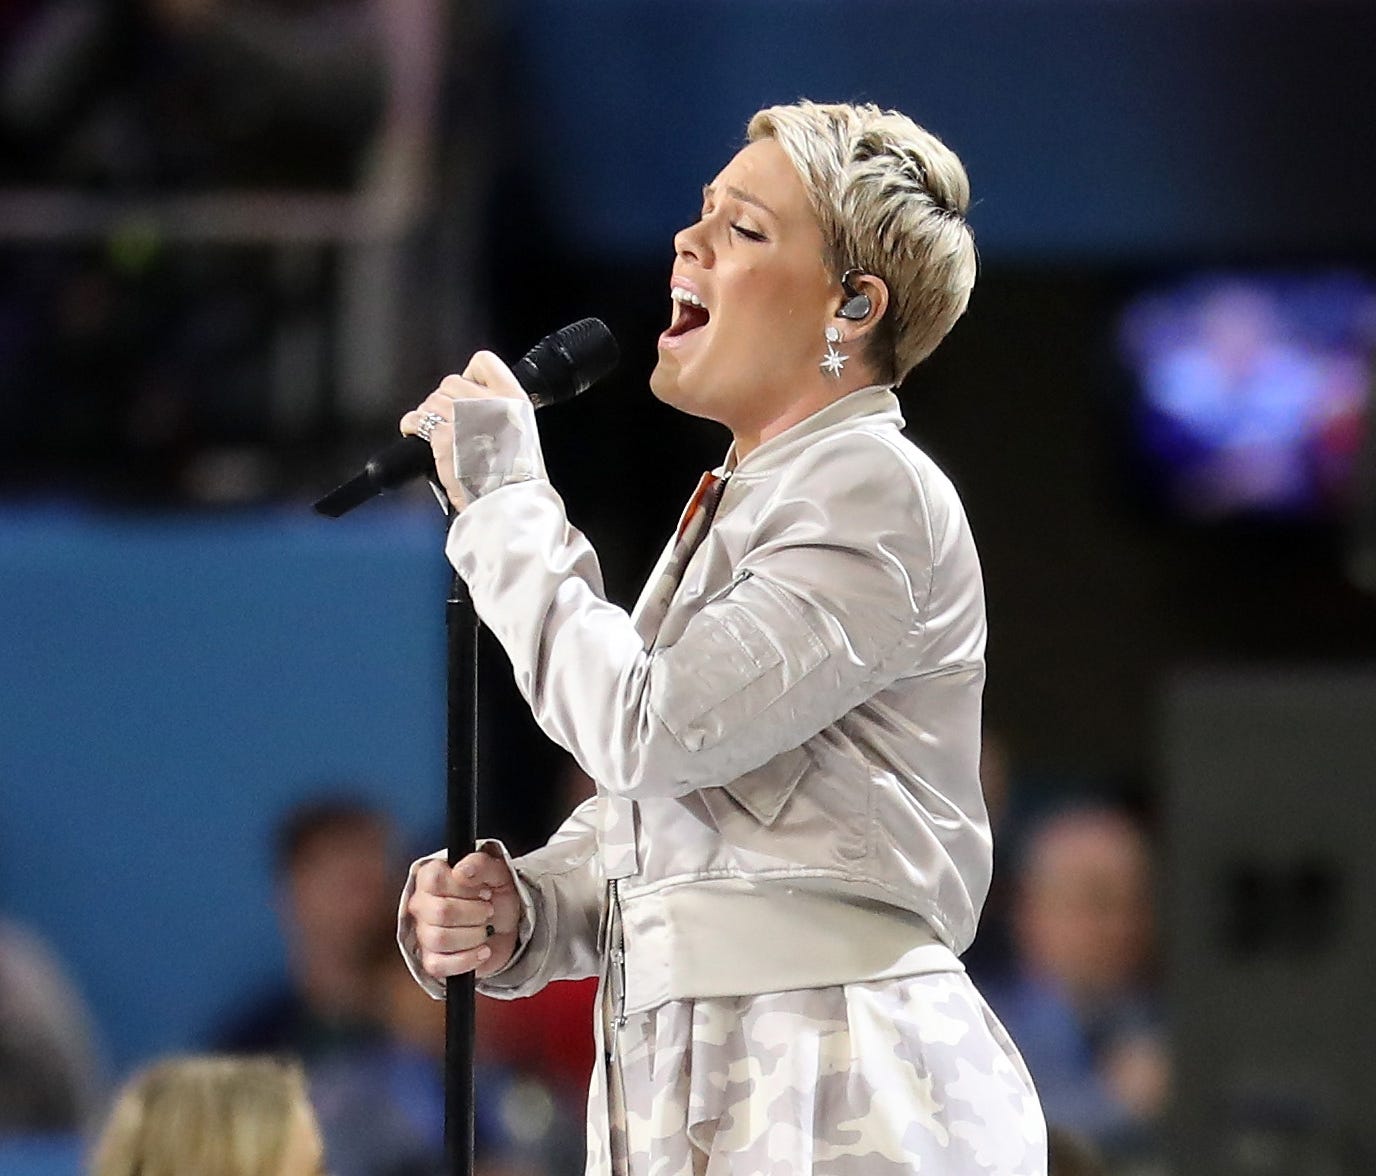 Pink sings the national anthem prior to Super Bowl LII between the New England Patriots and the Philadelphia Eagles.